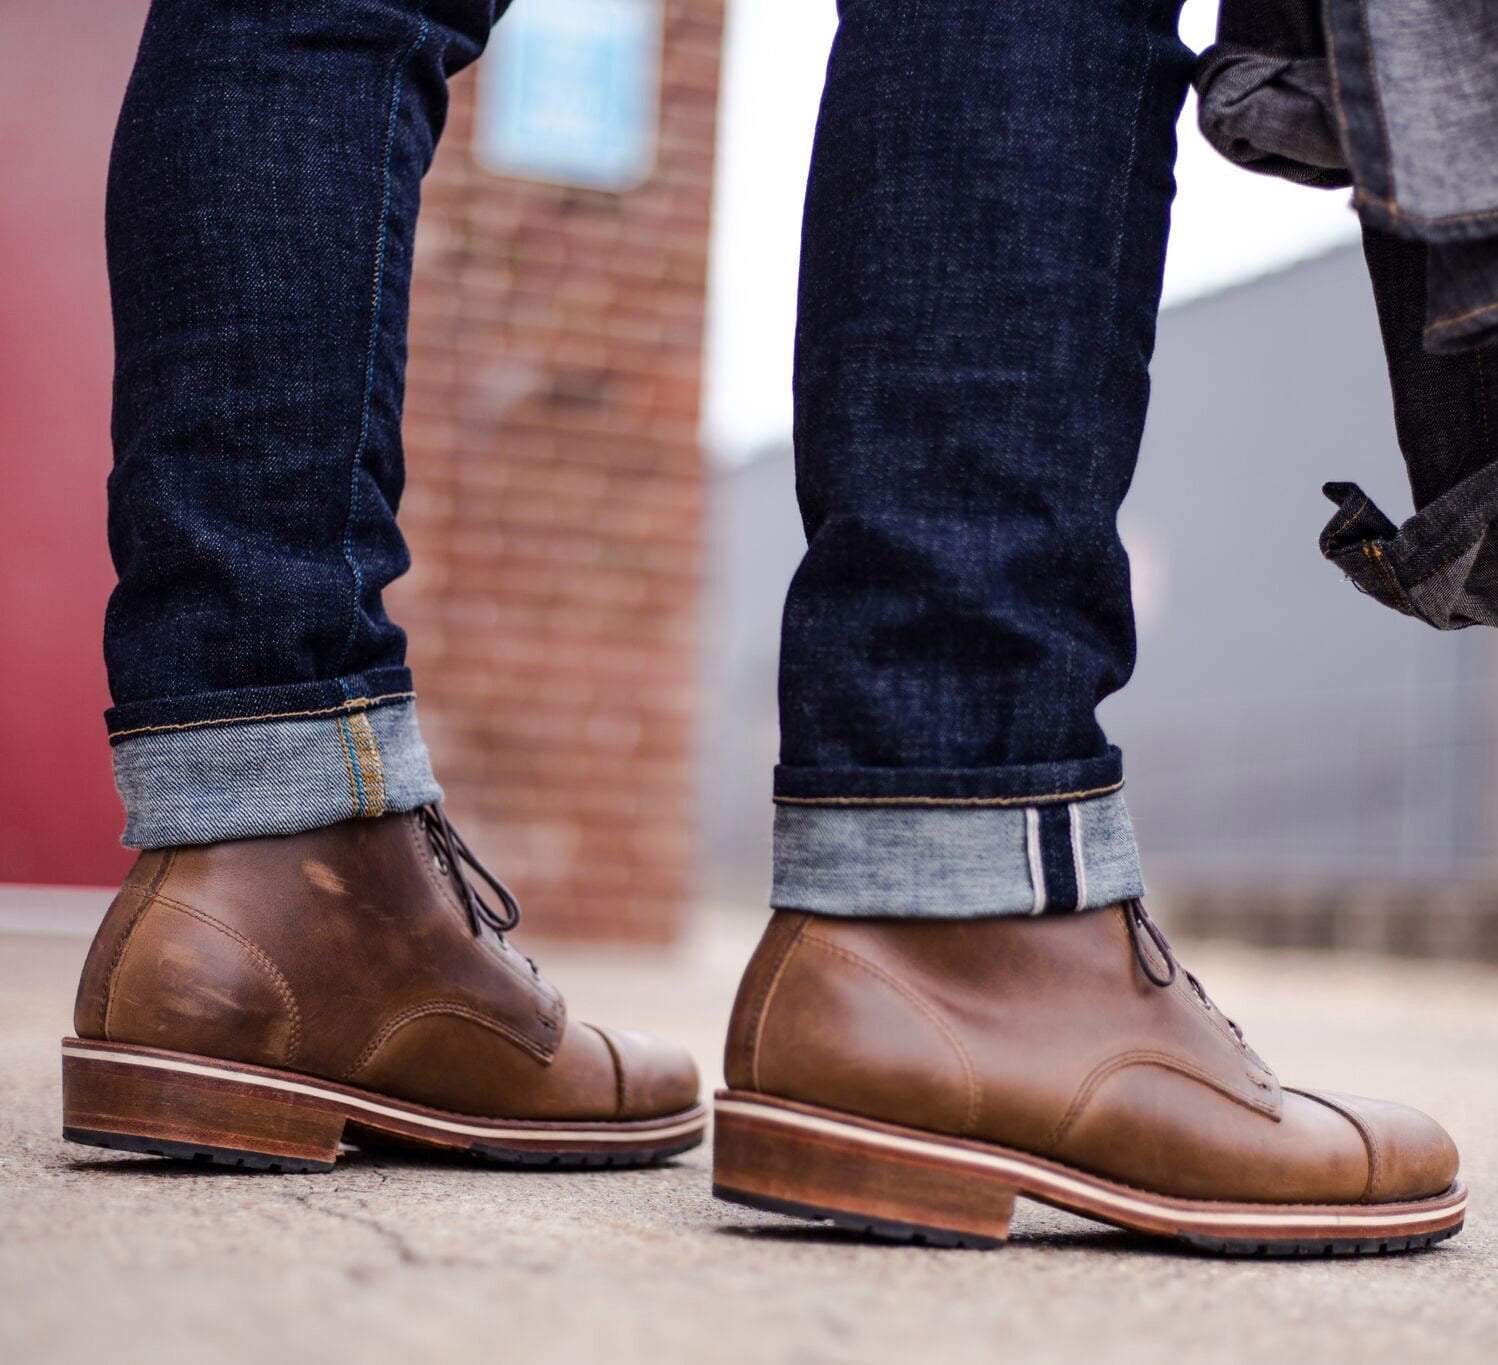 Men's Brown Leather Boots by Nate Pruitt